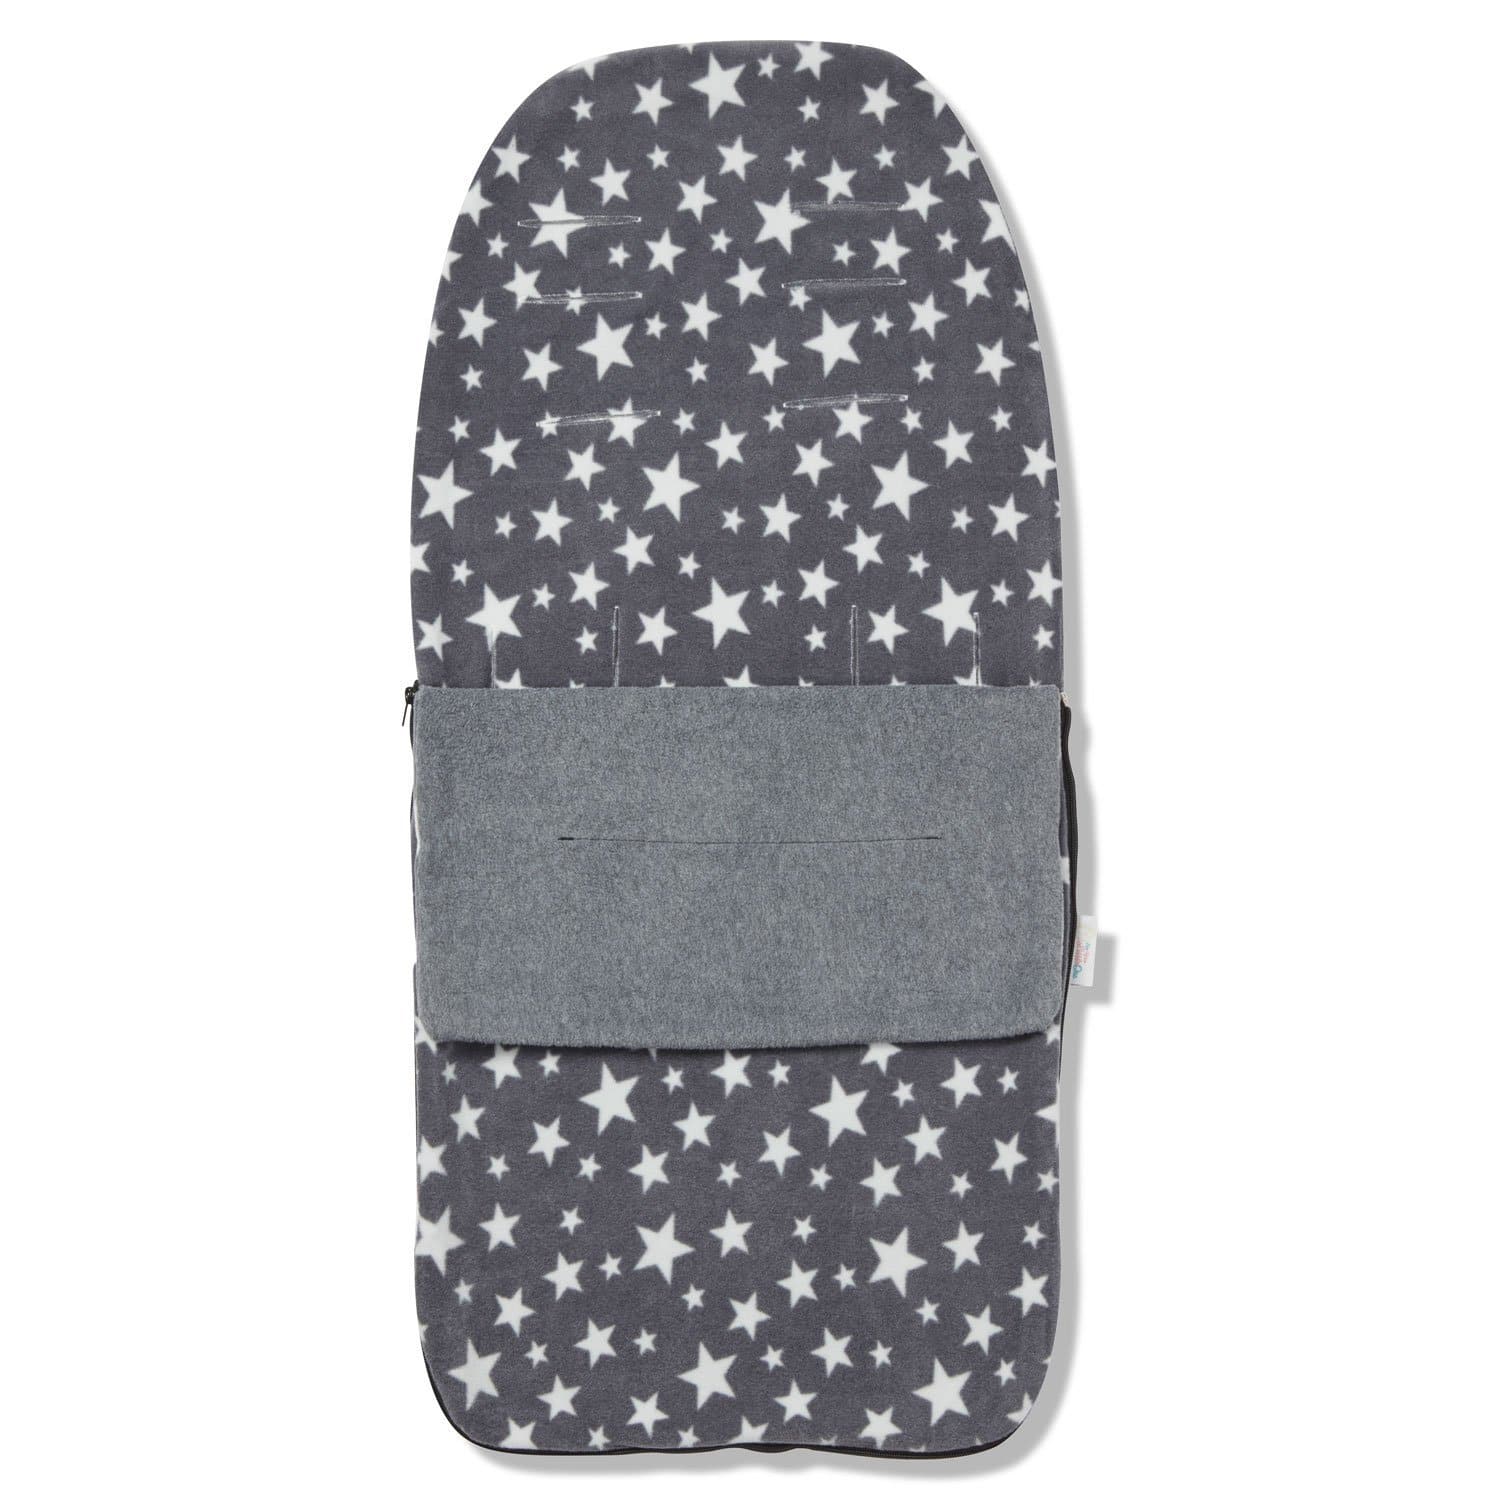 Snuggle Summer Footmuff Compatible with Mountain Buggy - For Your Little One